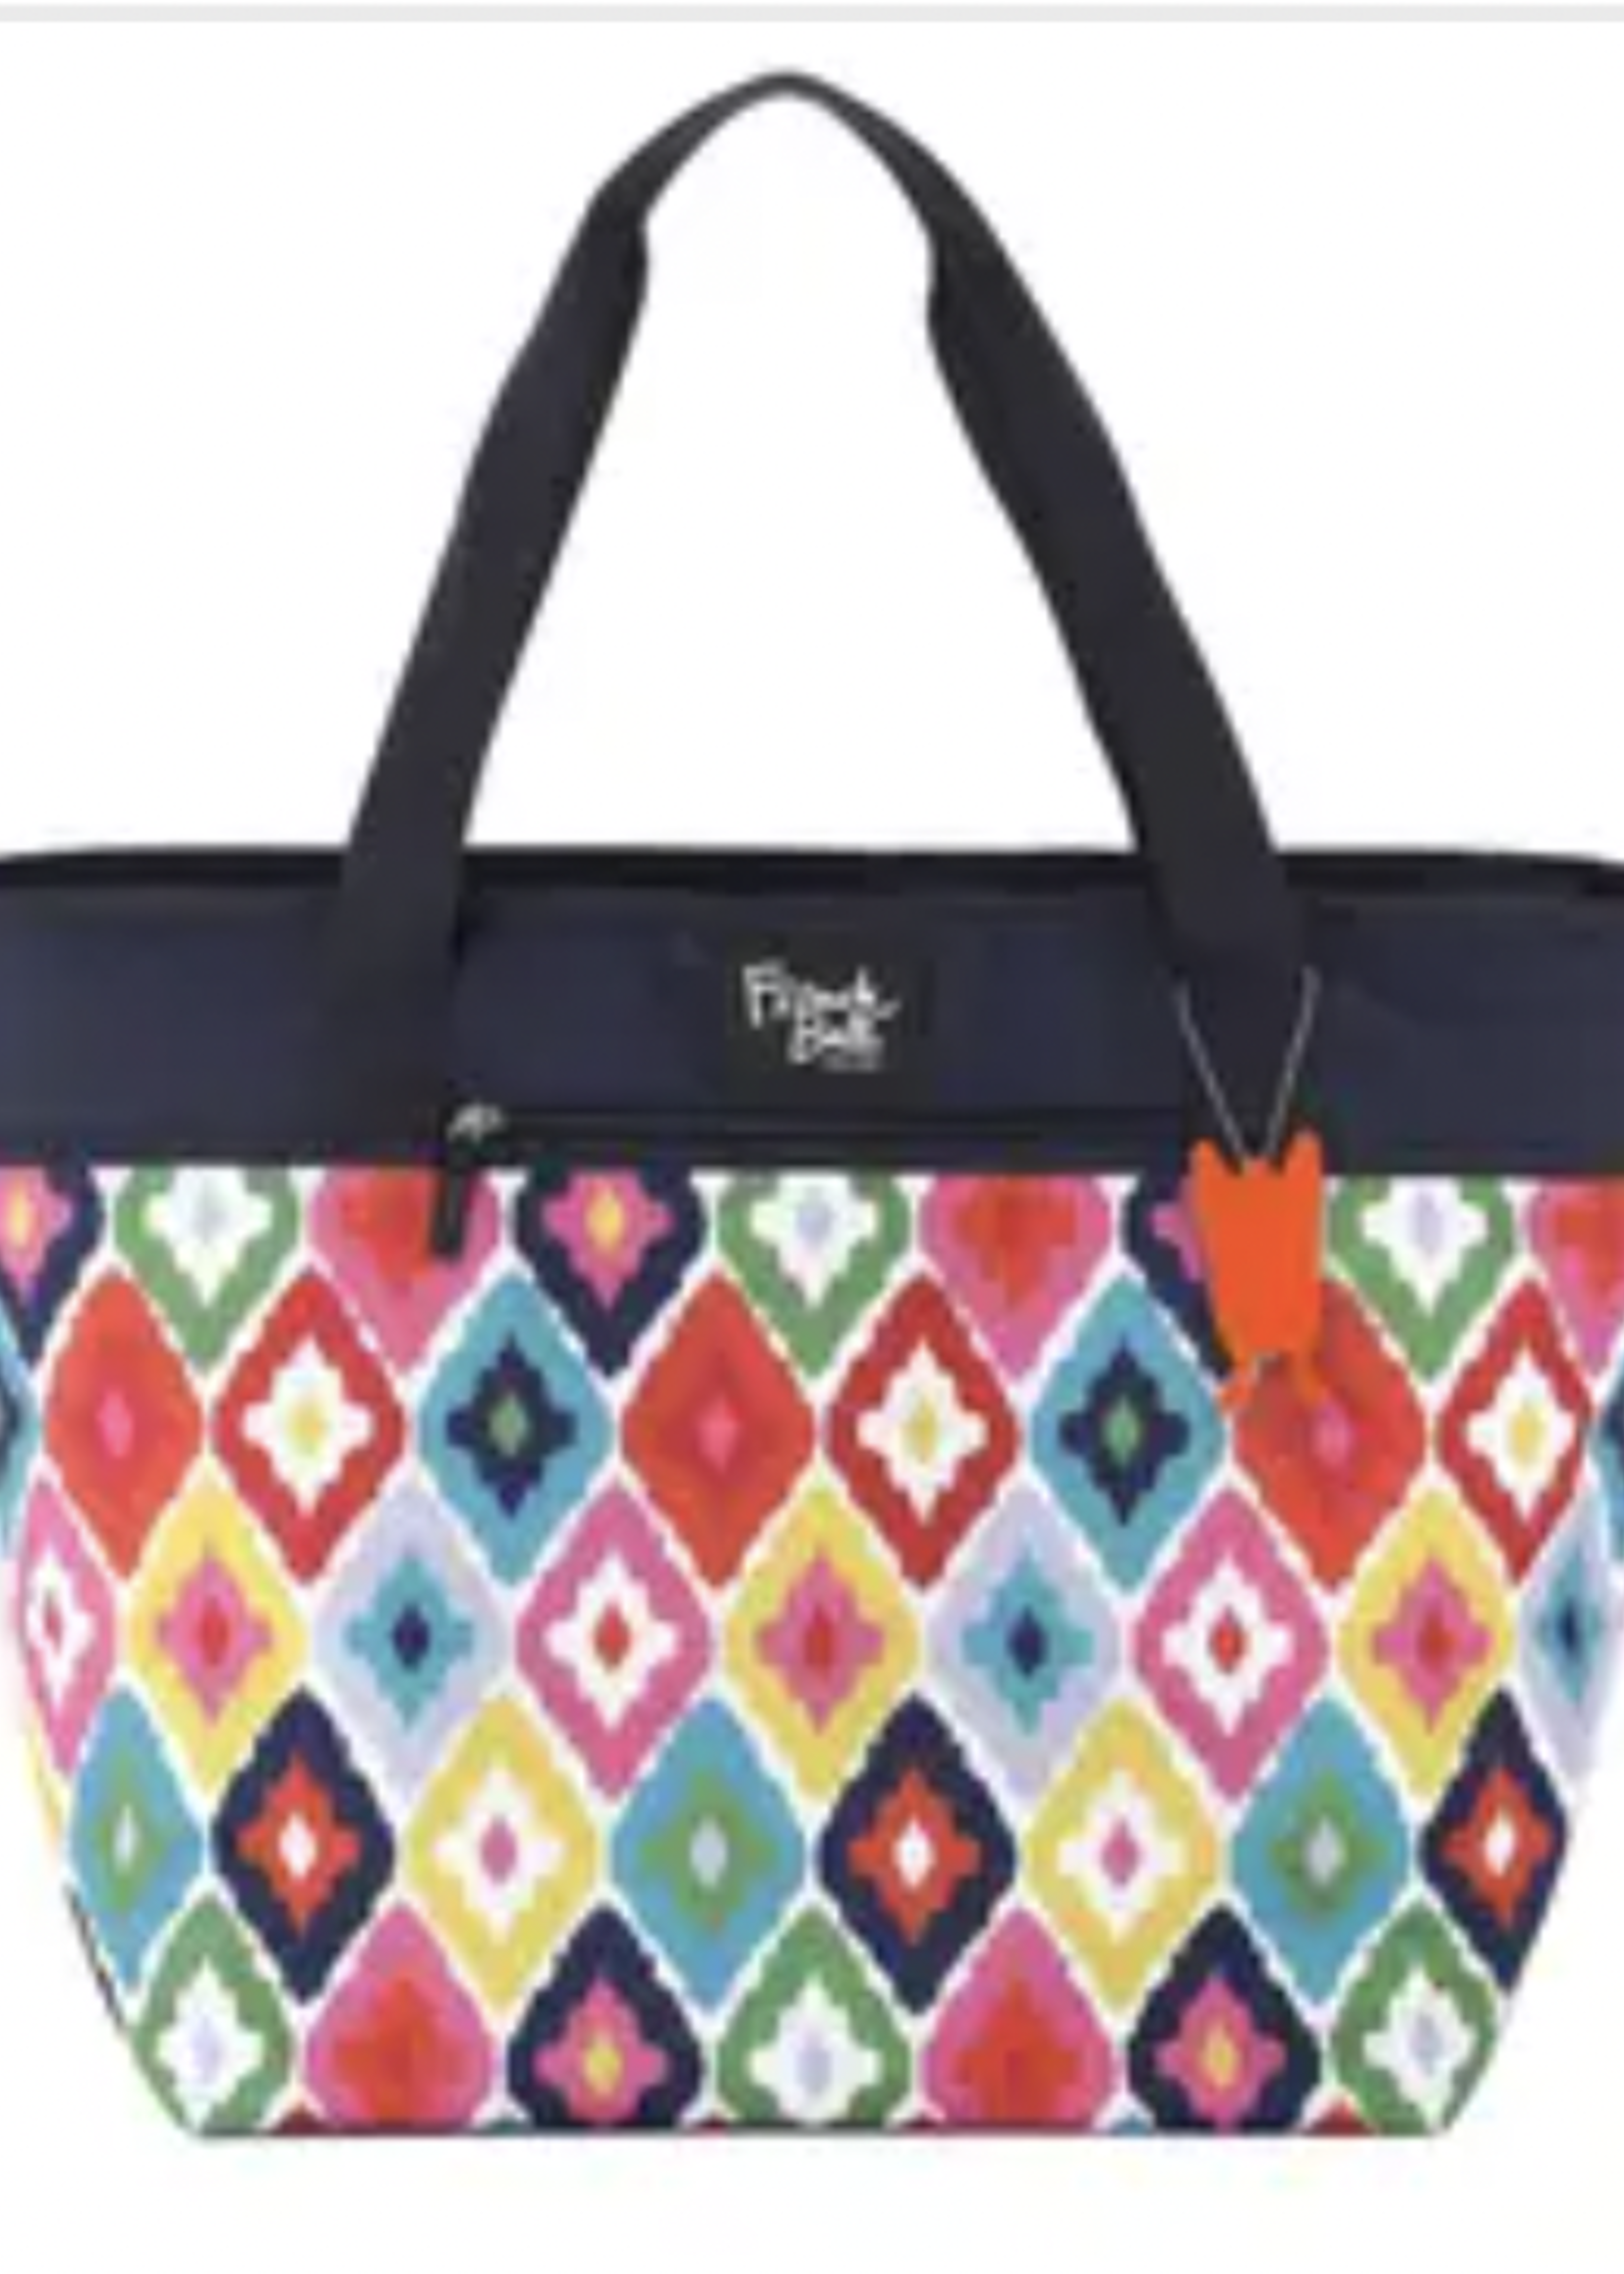 French Bull Kat Insulated Picnic and Cooler Tote Bag